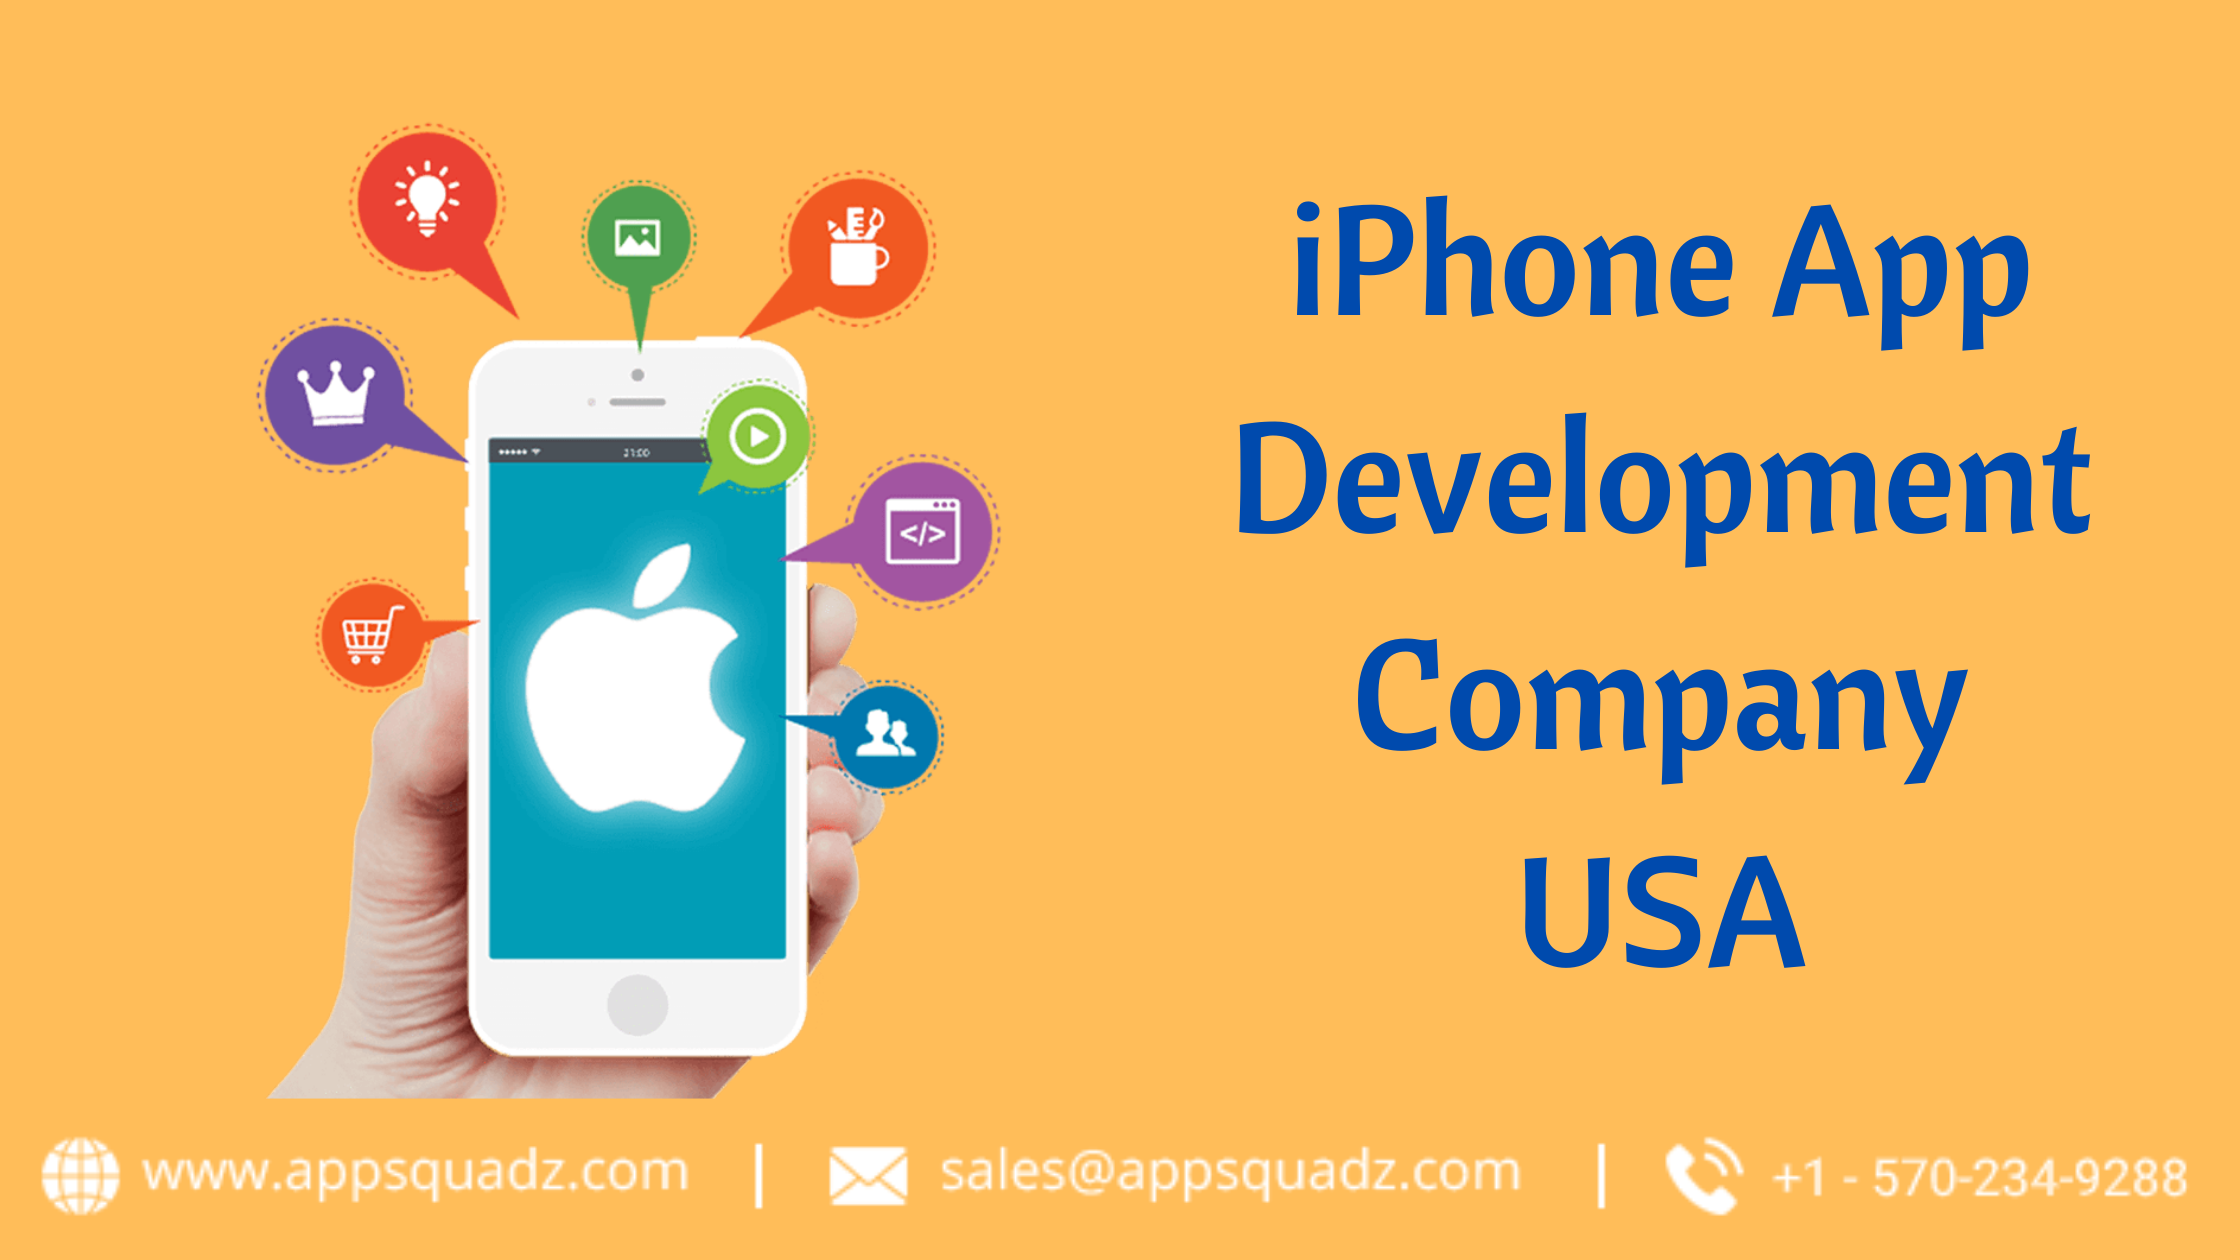 iPhone App Development Company USA is Providing Best Results in Software Programming